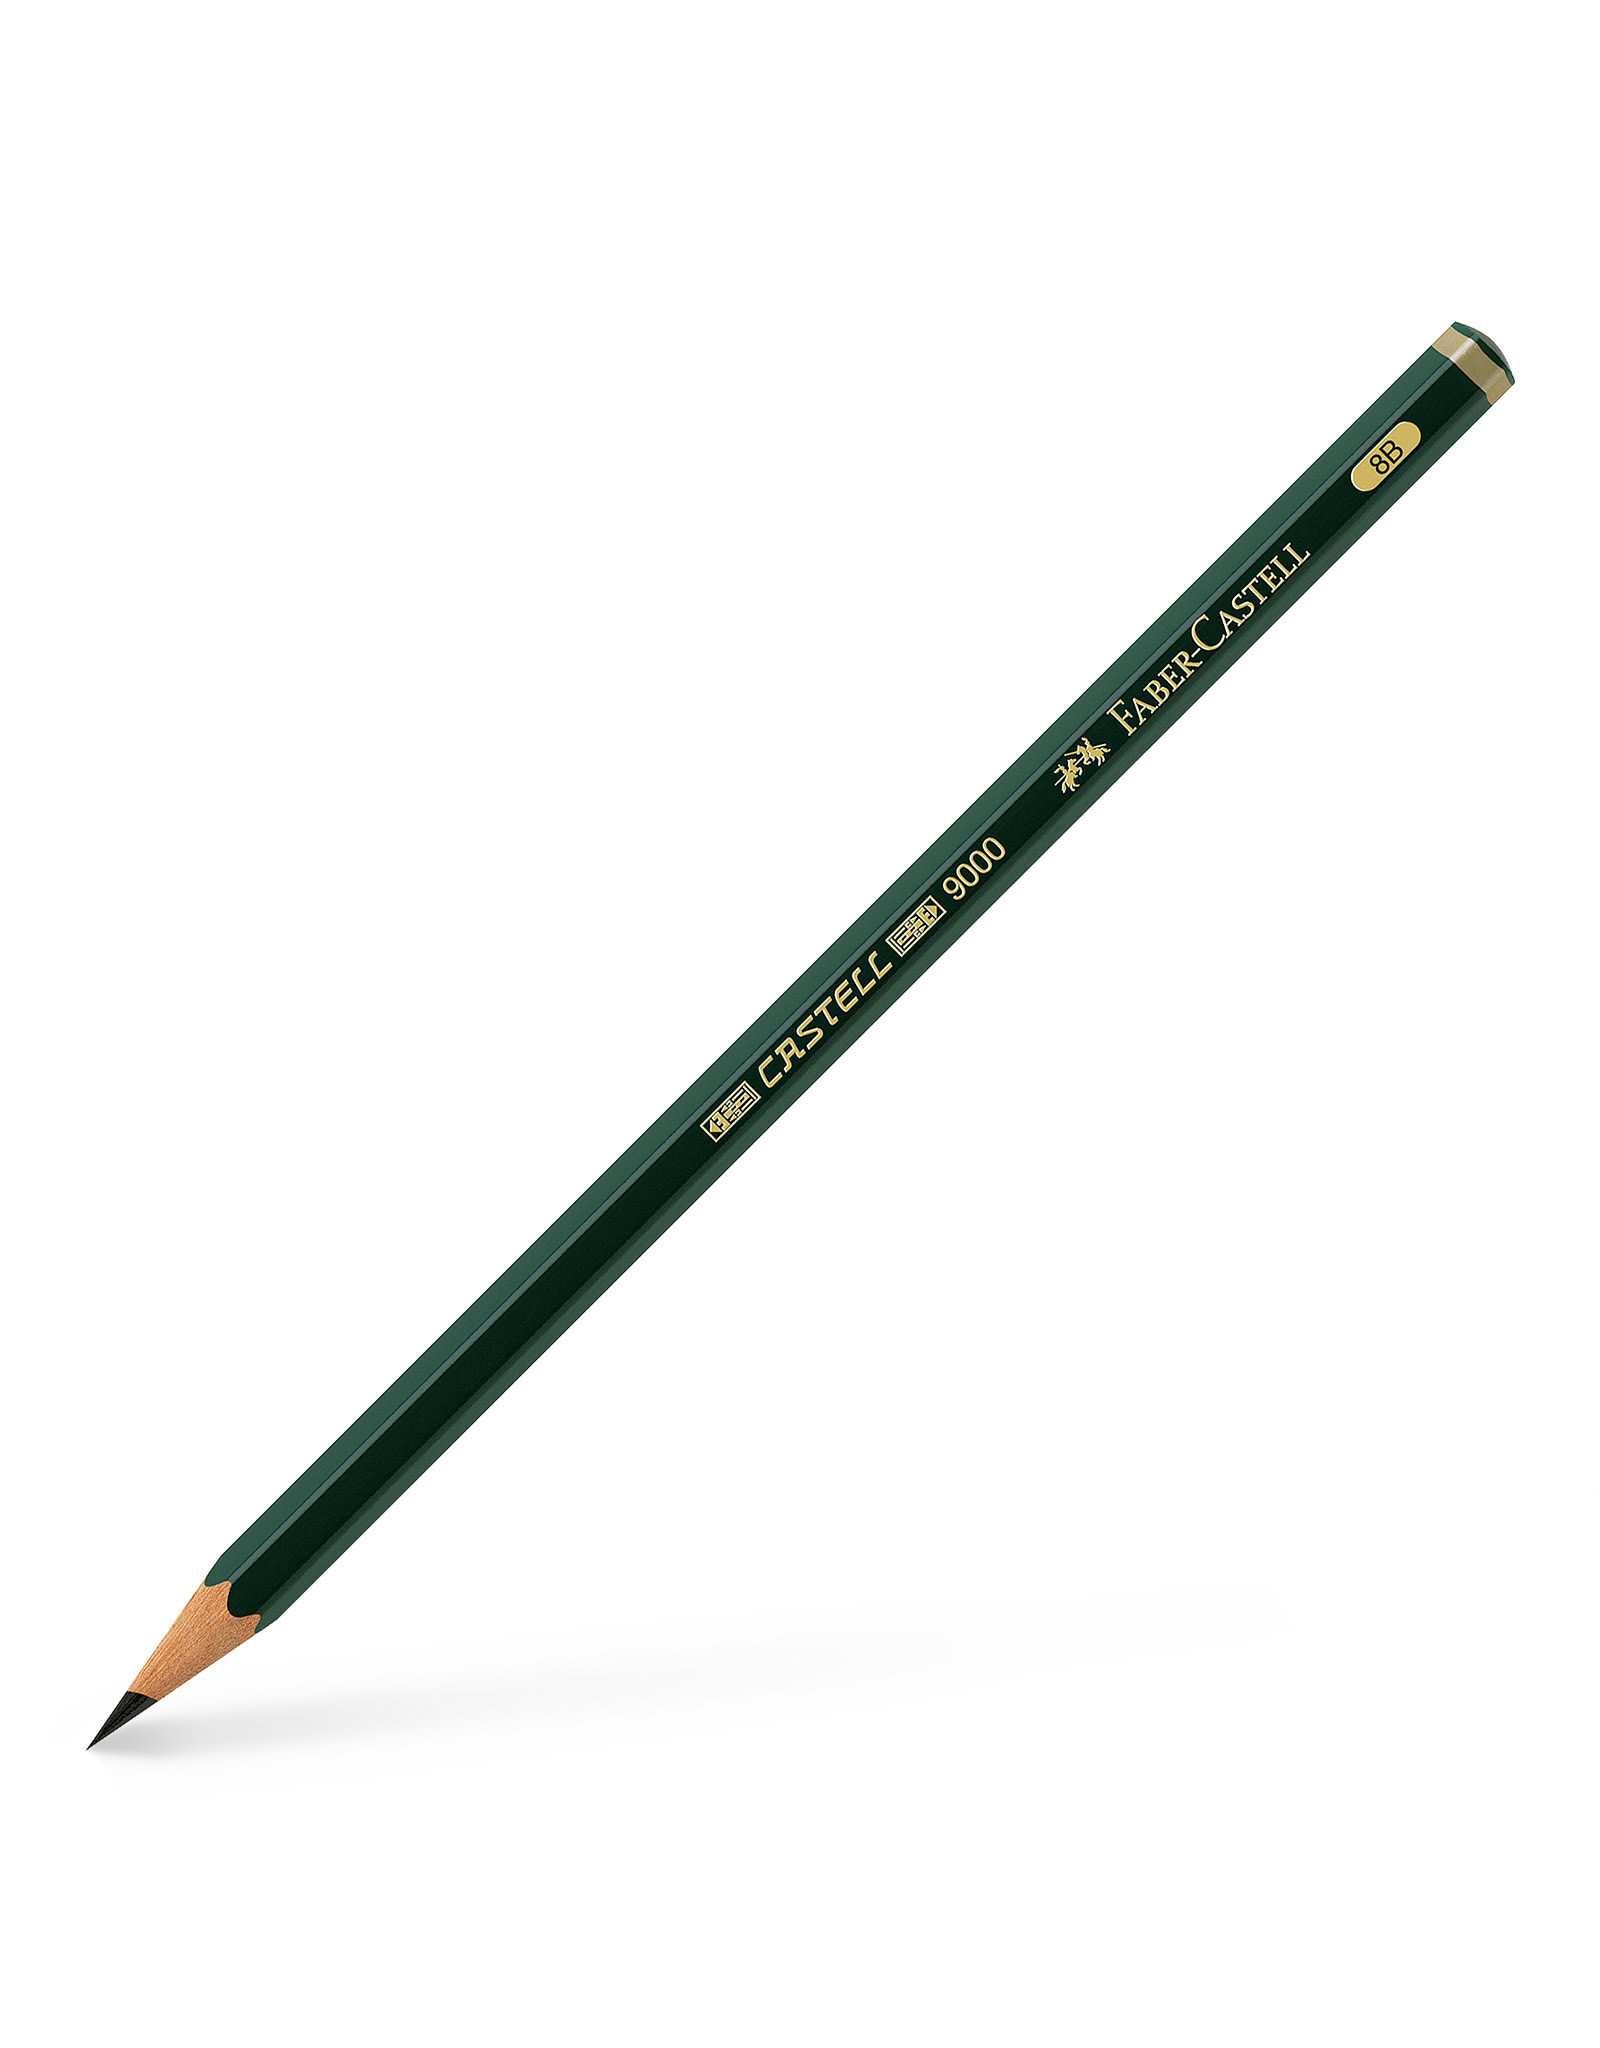 FABER-CASTELL Castell® 9000 Graphite Pencil, 8B